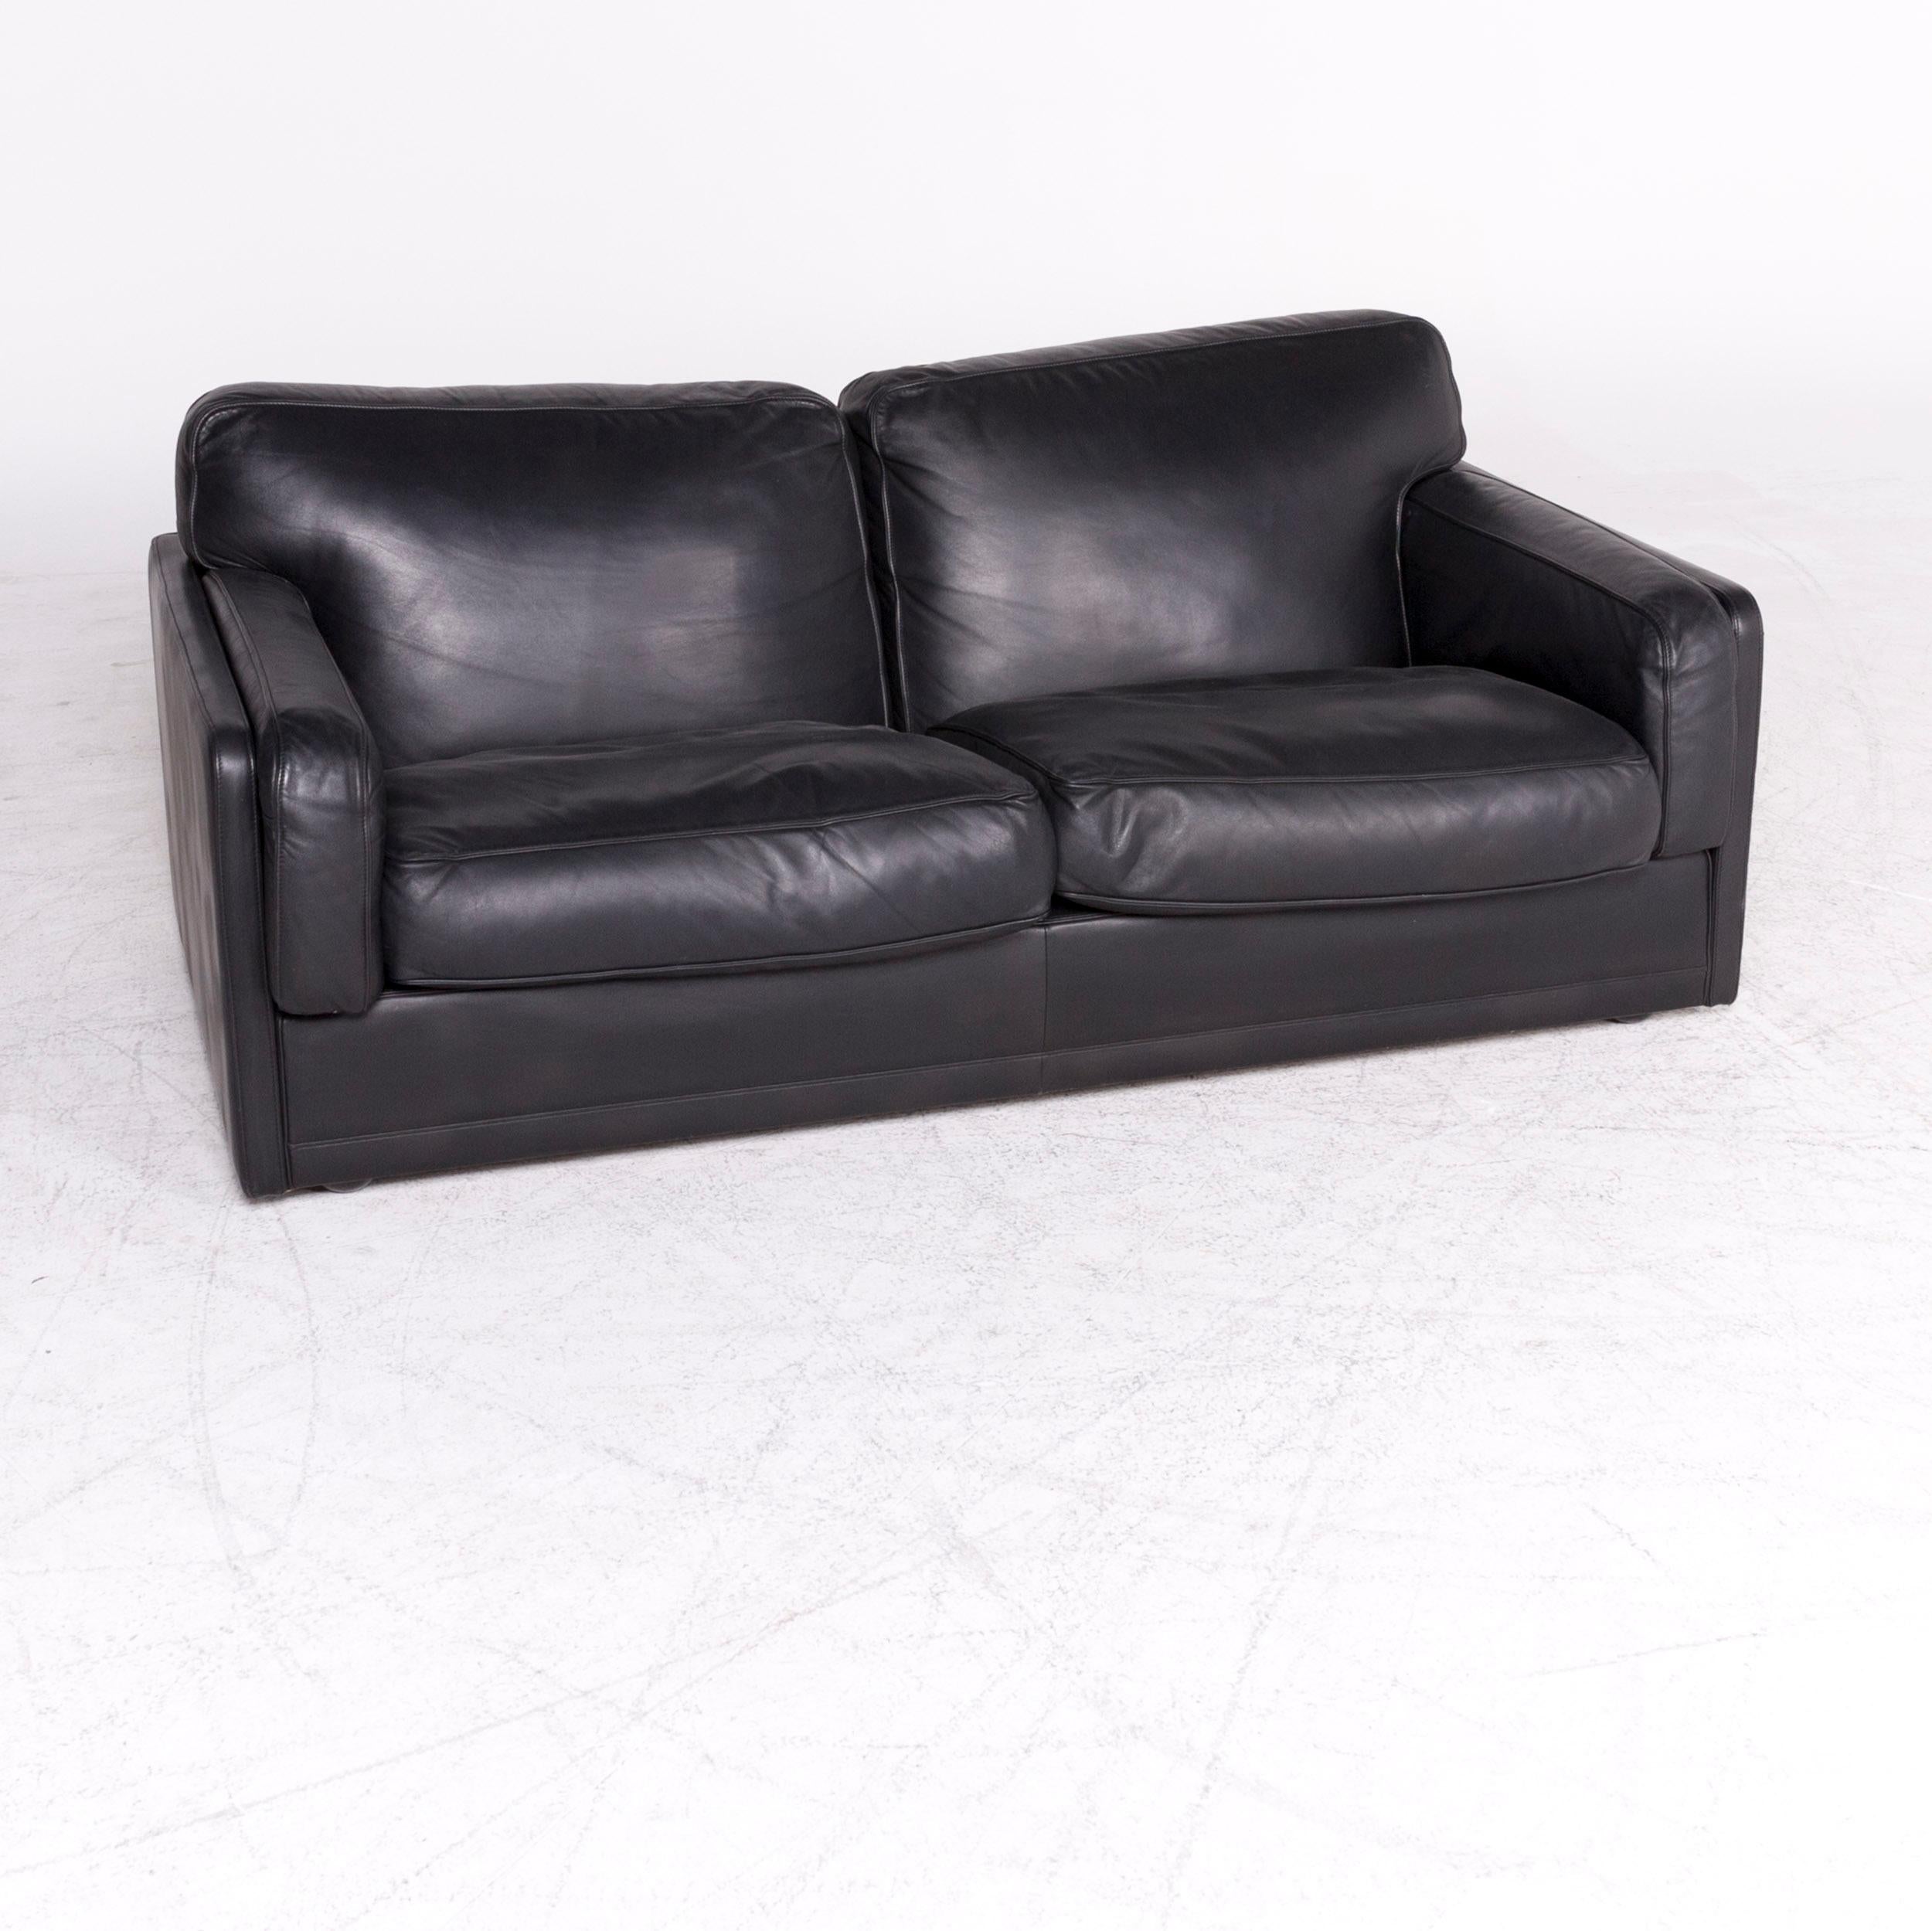 We bring to you a Poltrona Frau Socrate designer leather sofa set black genuine leather two.

Product measurements in centimeters:

Depth 96
Width 175
Height 73
Seat-height 42
Rest-height 55
Seat-depth 51
Seat-width 139
Back-height